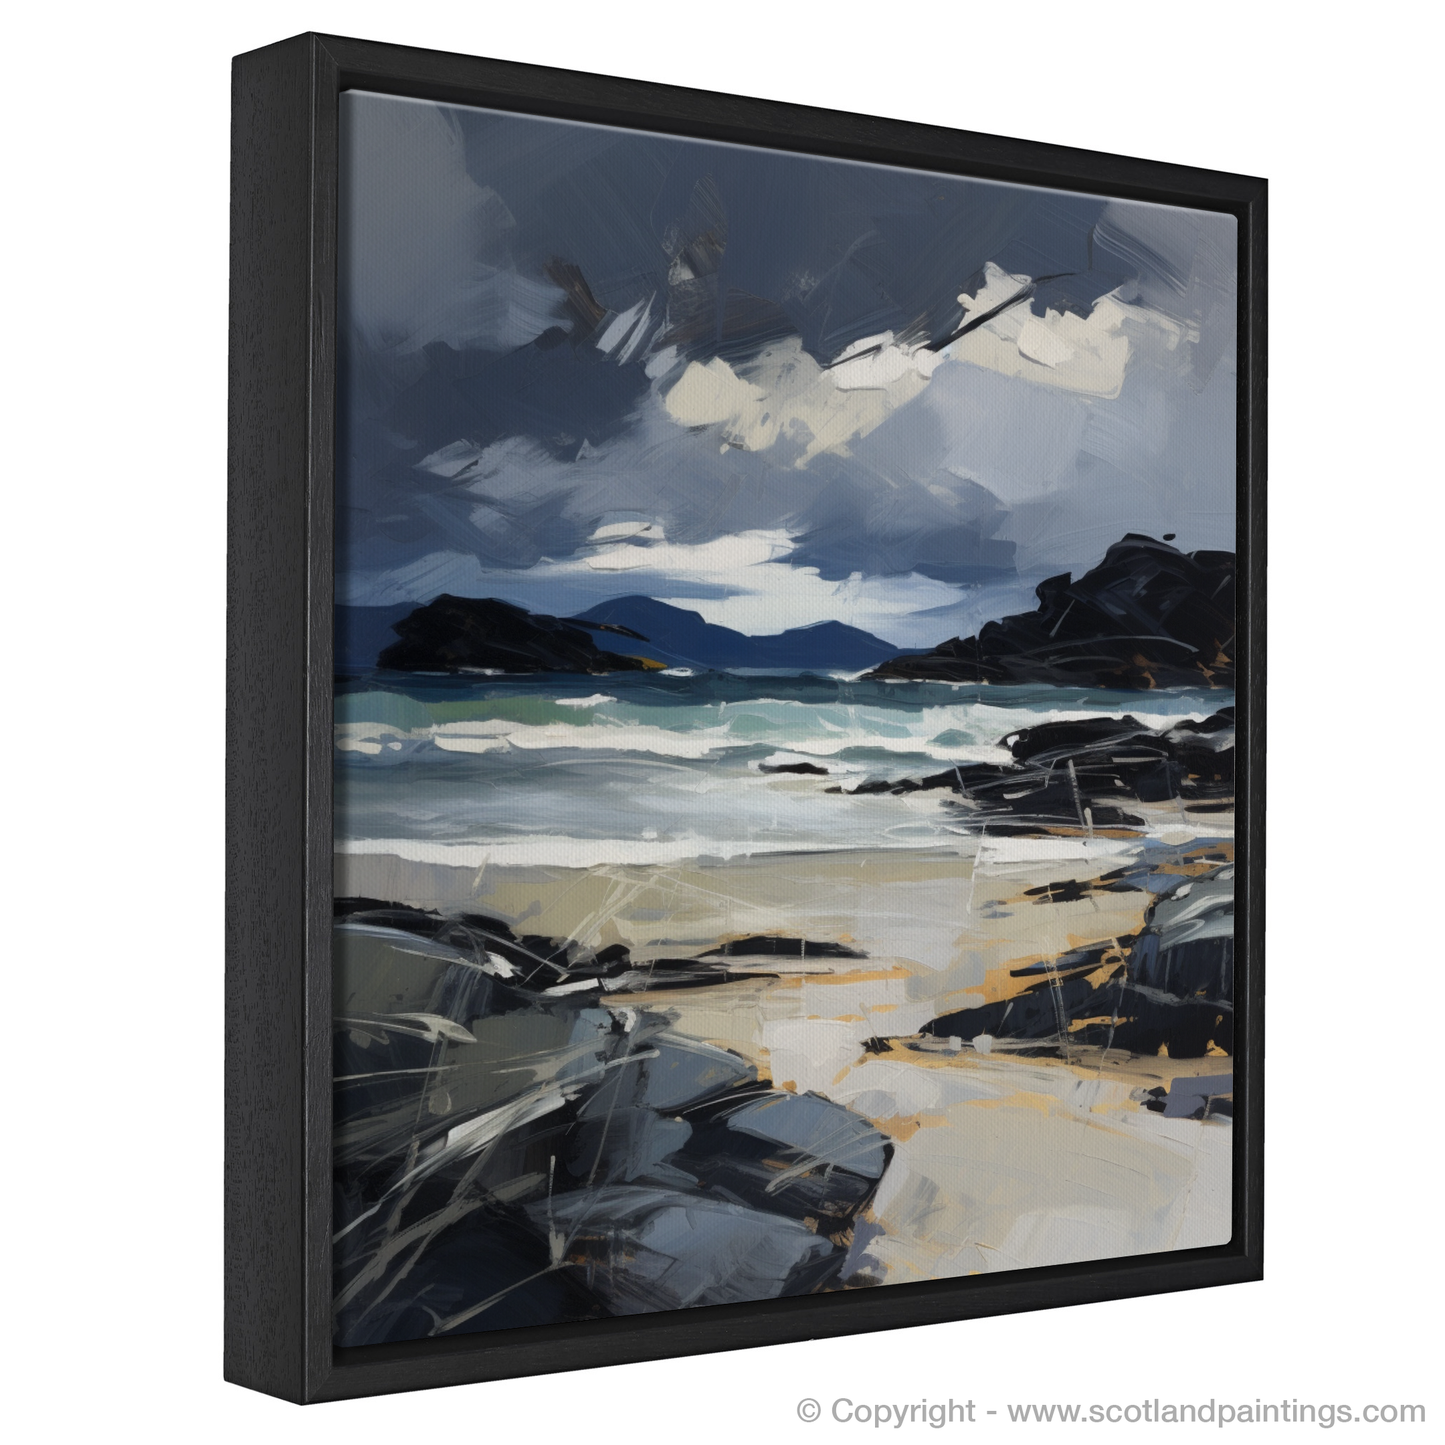 Painting and Art Print of Mellon Udrigle Beach with a stormy sky entitled "Storm Over Mellon Udrigle: An Expressionist Tribute to Scottish Shores".